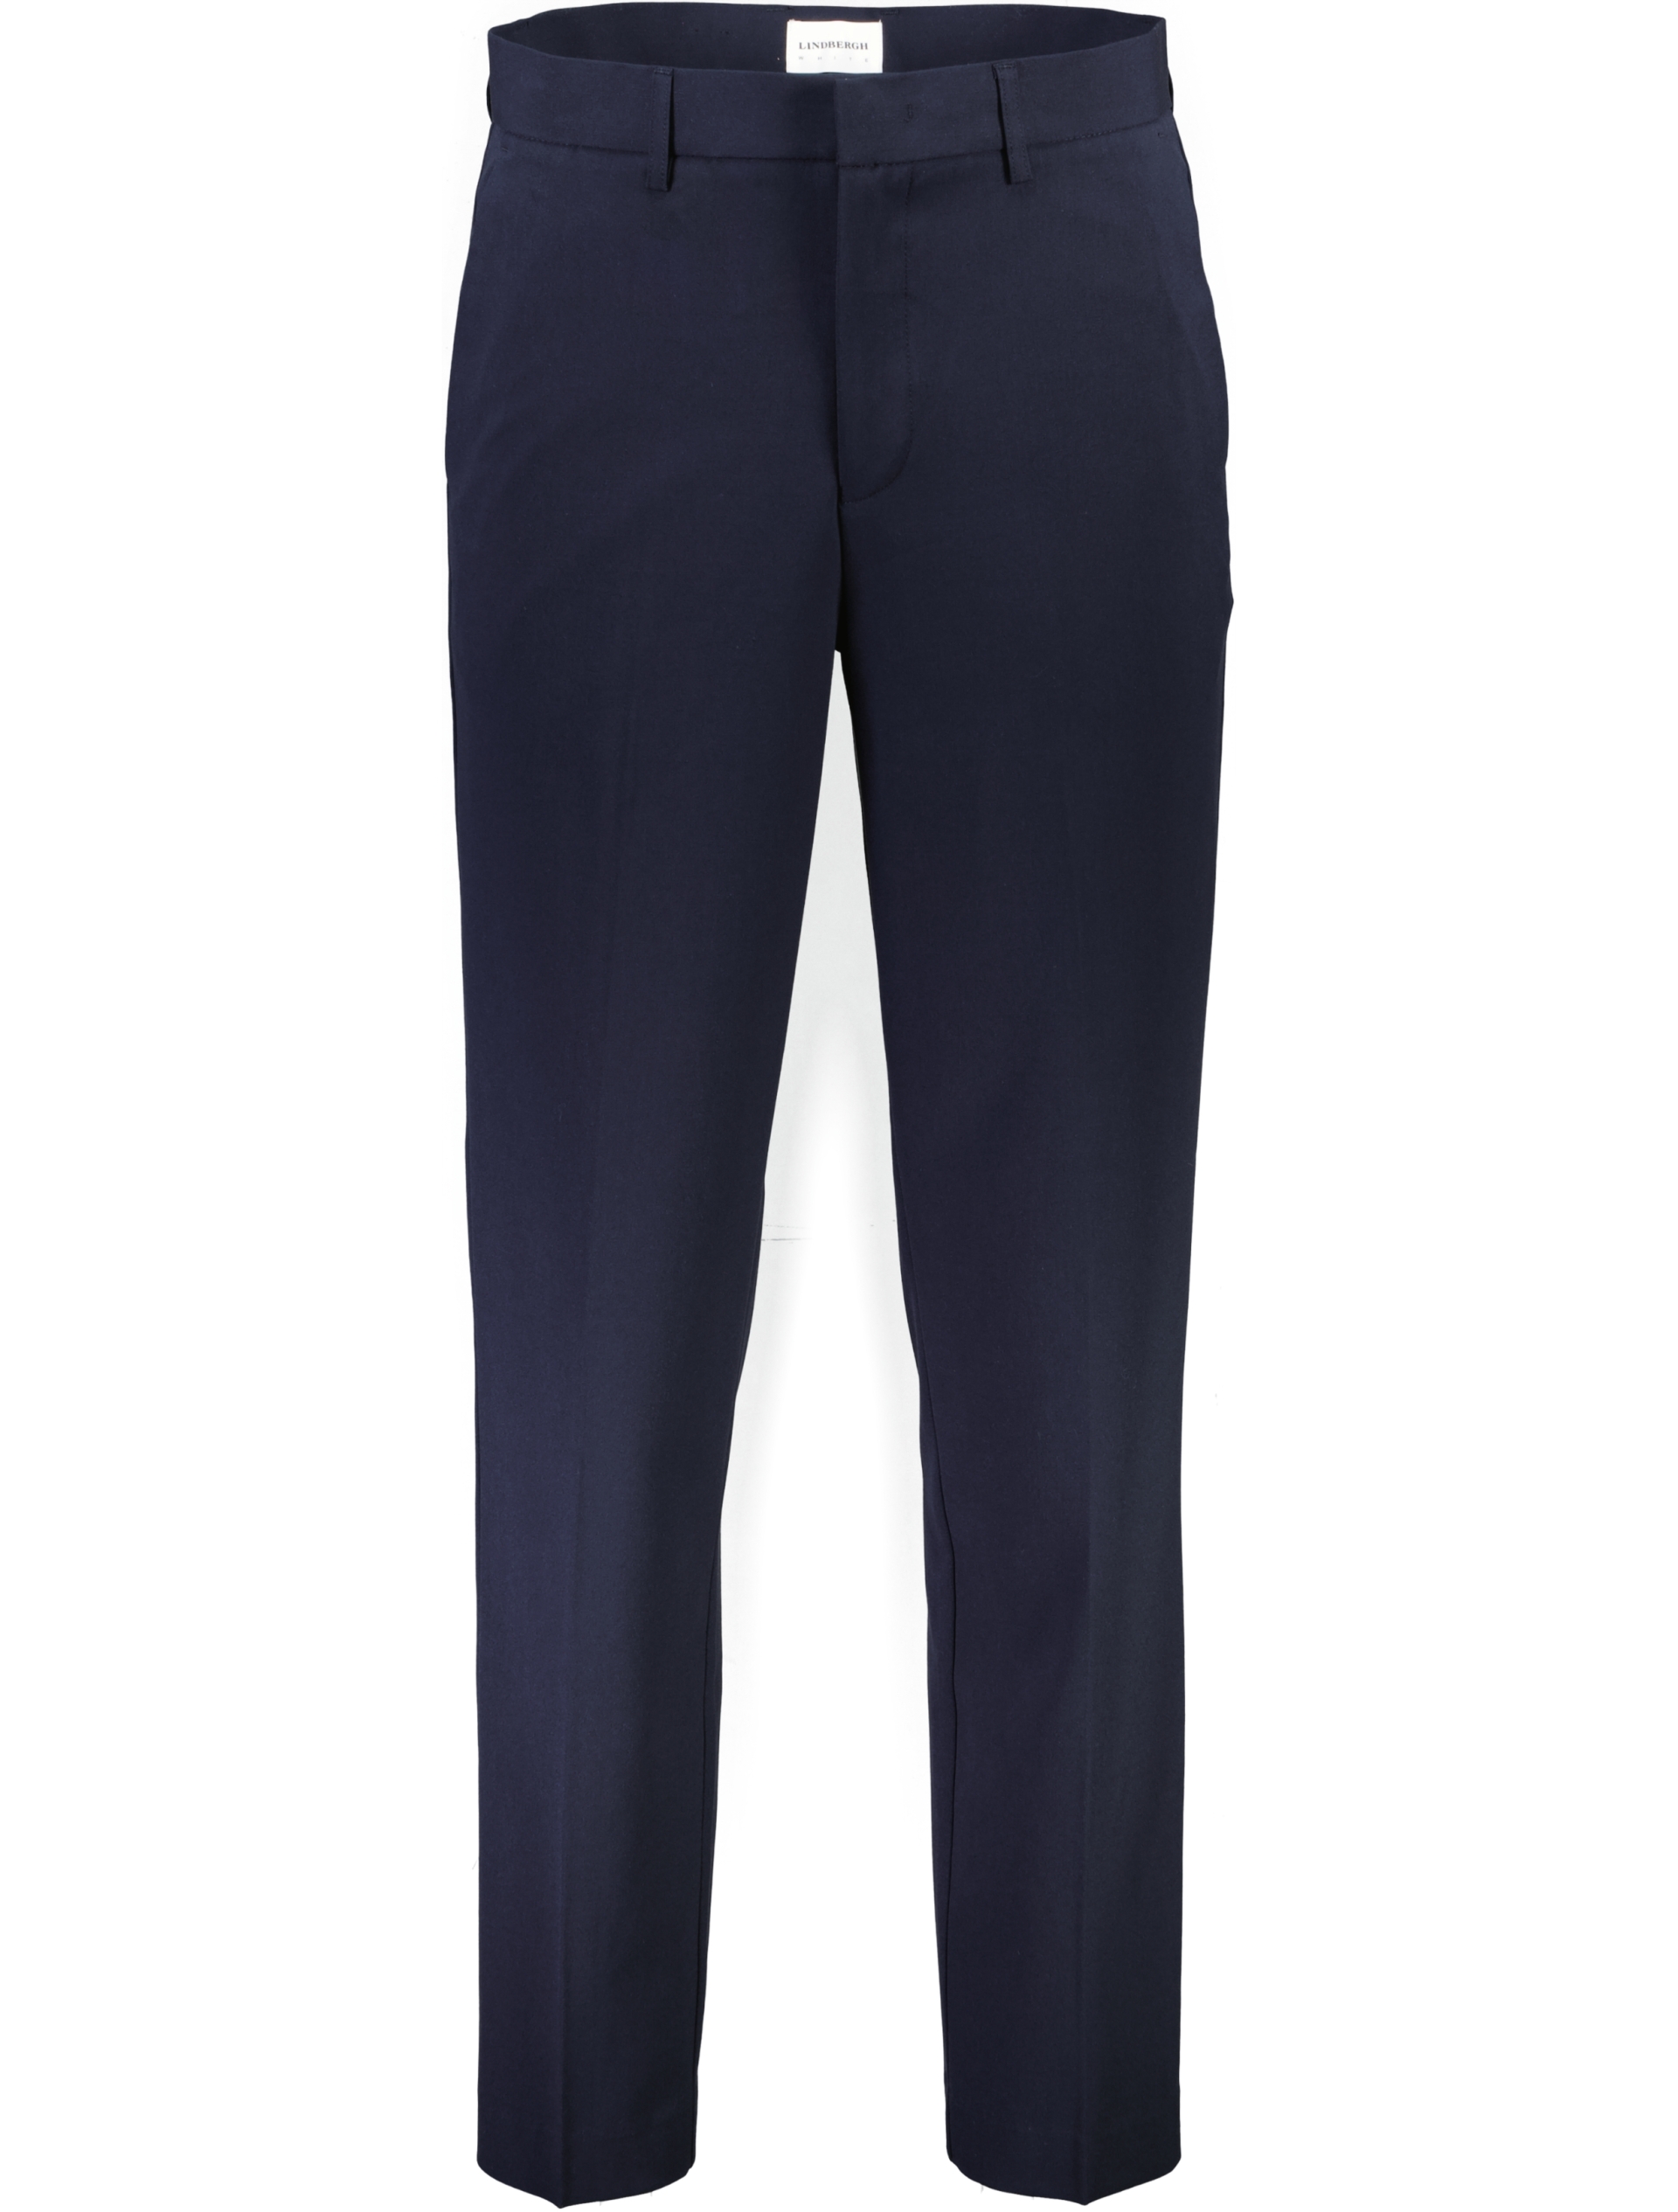 Lindbergh Classic trousers blue / navy